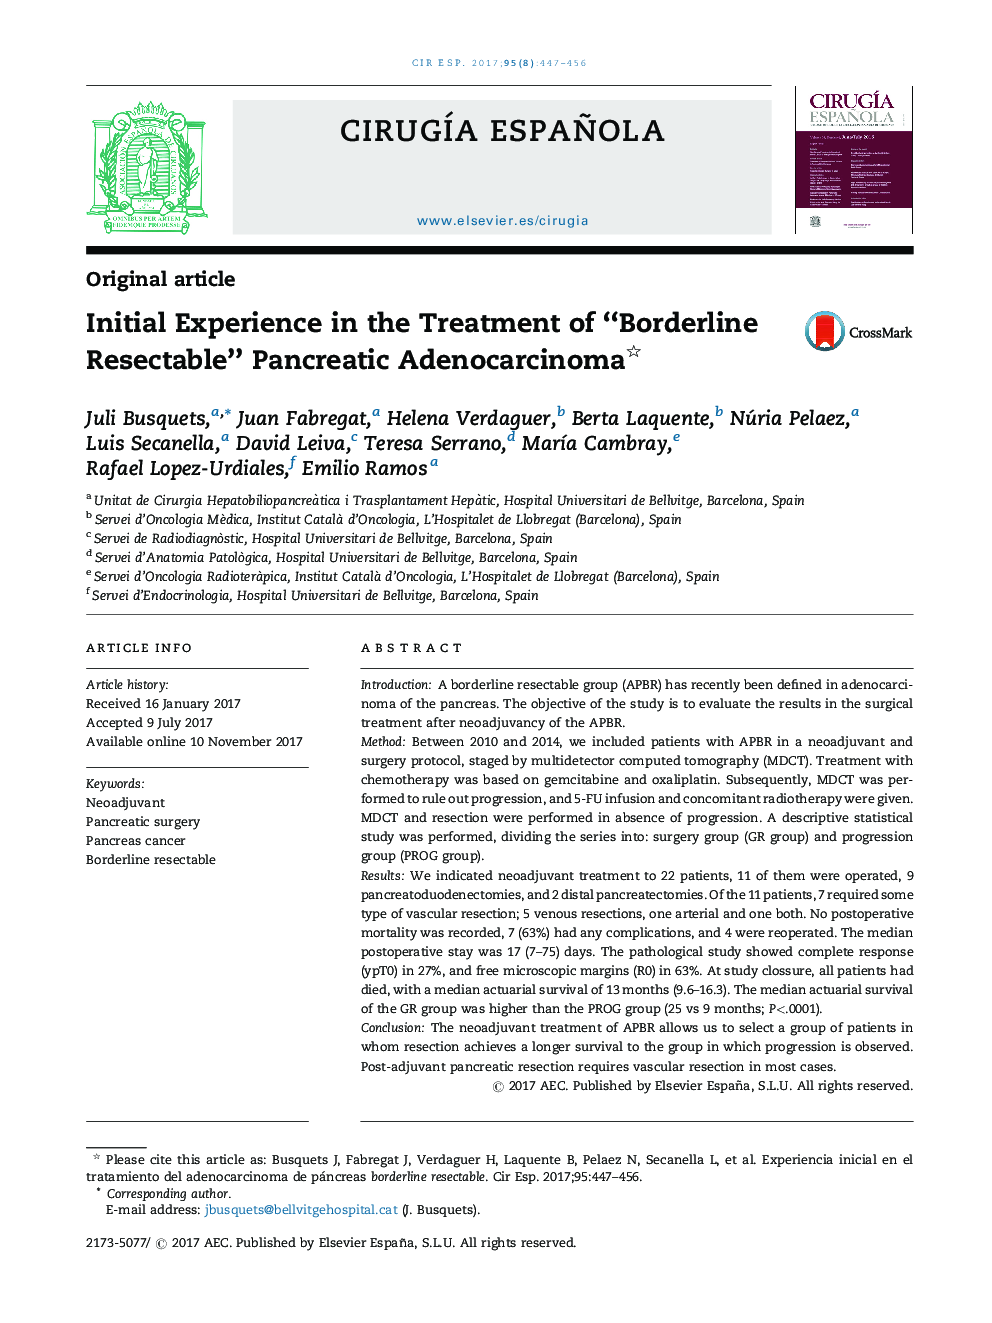 Initial Experience in the Treatment of “Borderline Resectable” Pancreatic Adenocarcinoma